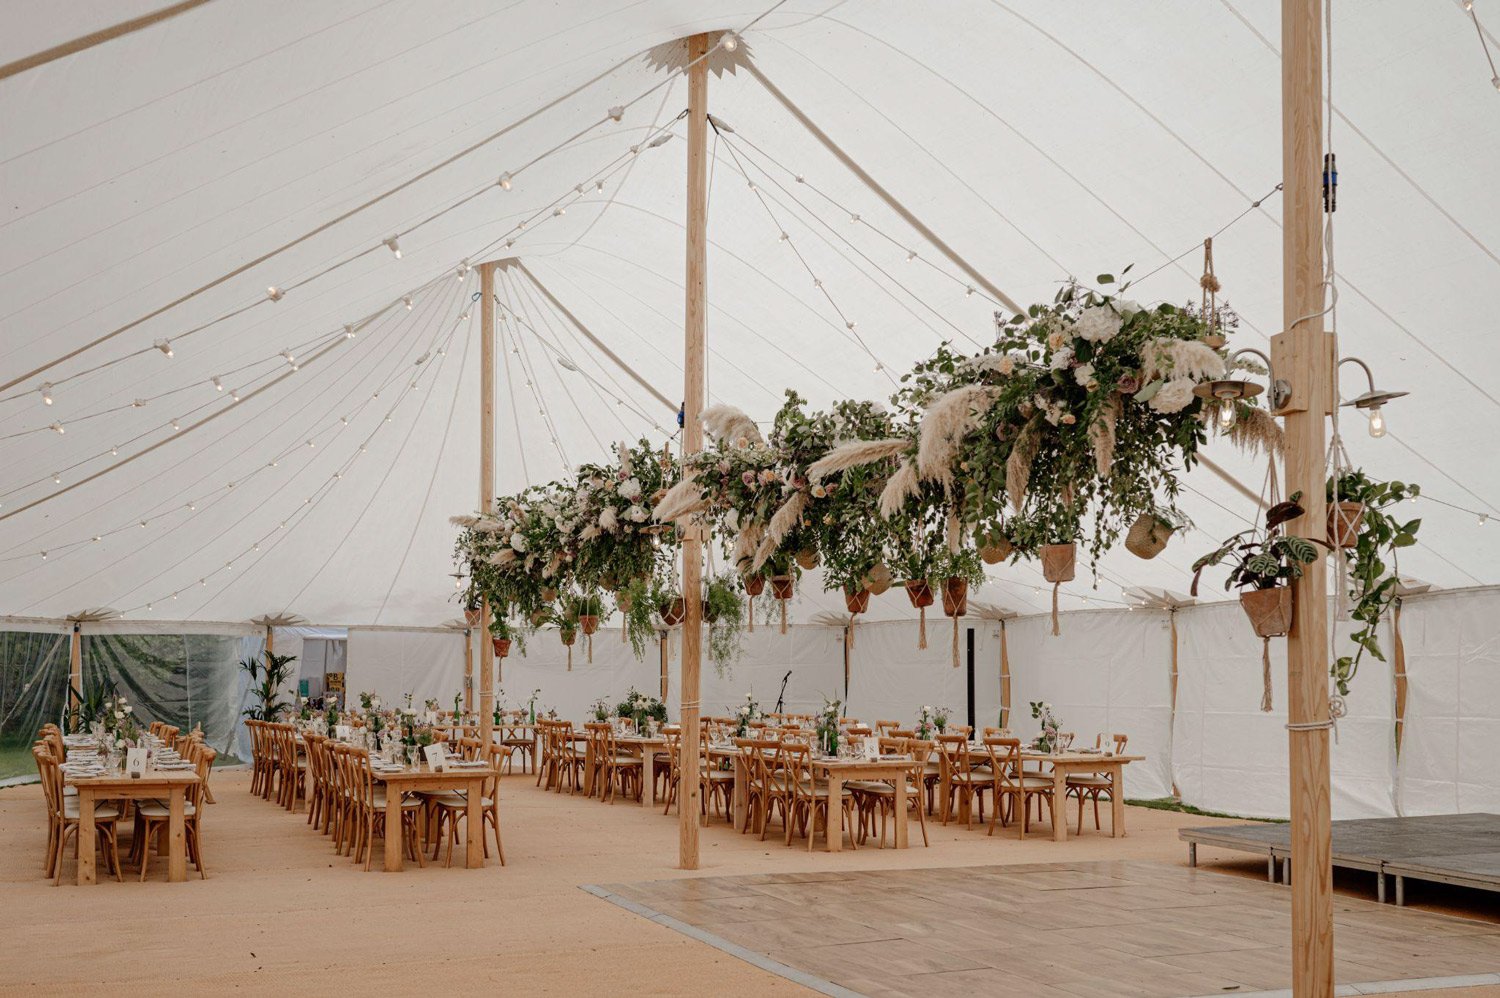 coastal-tents-tipi-marquee-hire-weddings-events-swanage-dorset-south-west-blog-tipi-or-sailcloth-gallery-2.jpg